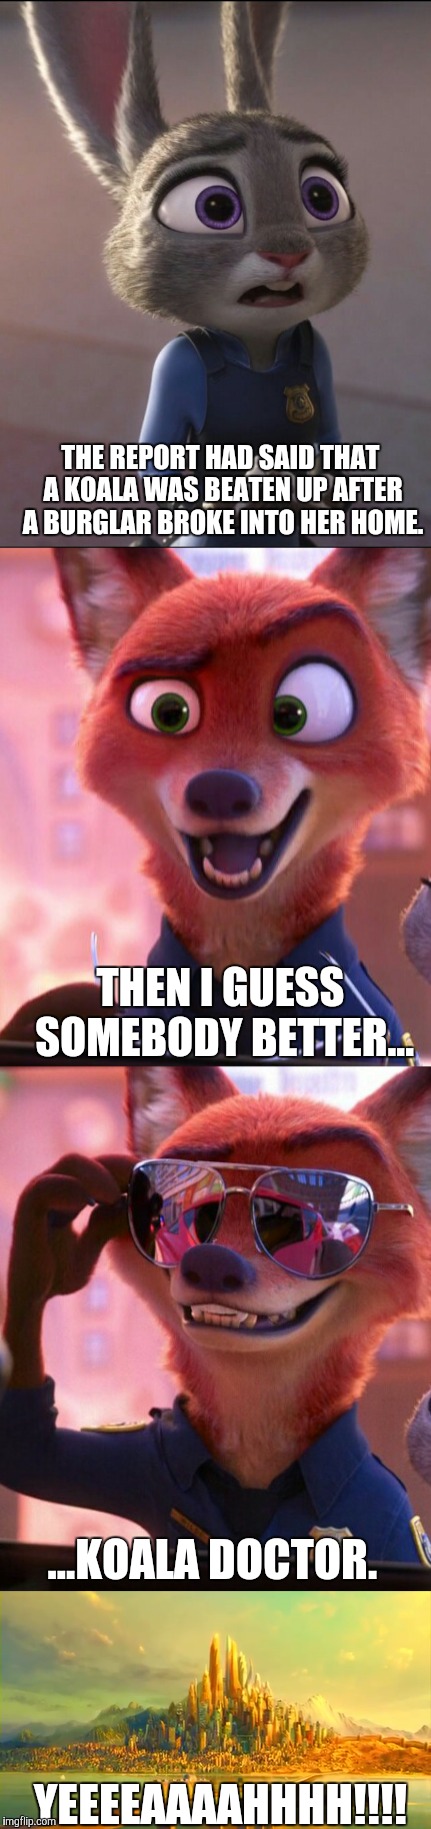 CSI: Zootopia 4 | THE REPORT HAD SAID THAT A KOALA WAS BEATEN UP AFTER A BURGLAR BROKE INTO HER HOME. THEN I GUESS SOMEBODY BETTER... ...KOALA DOCTOR. YEEEEAAAAHHHH!!!! | image tagged in zootopia,judy hopps,nick wilde,parody,funny,memes | made w/ Imgflip meme maker